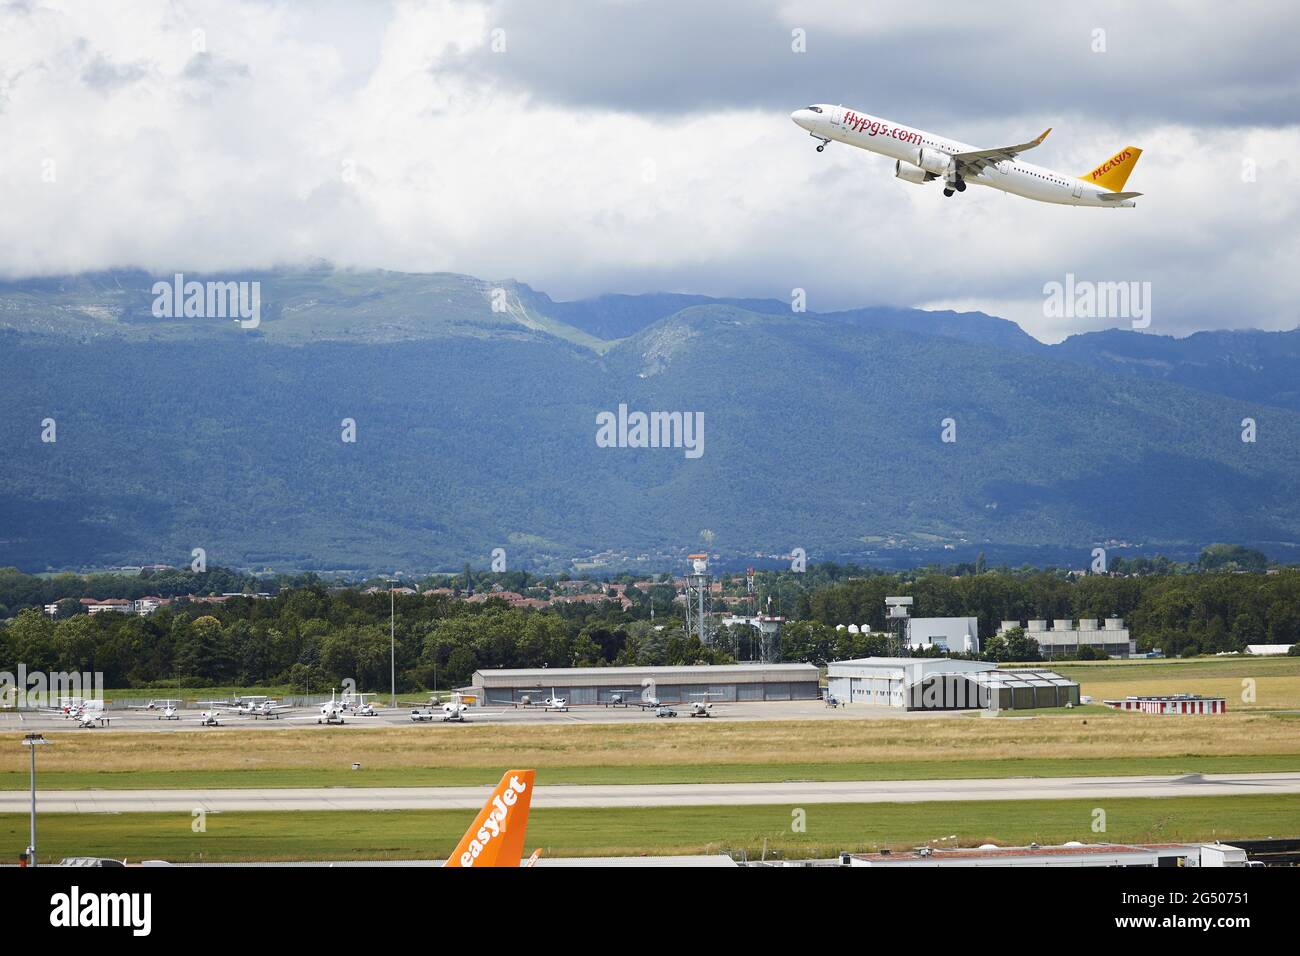 A Pegasus airline aircraft takes off next to an easyJet aircraft at  Cointrin airport in Geneva, Switzerland June 24, 2021. REUTERS/Denis  Balibouse Stock Photo - Alamy